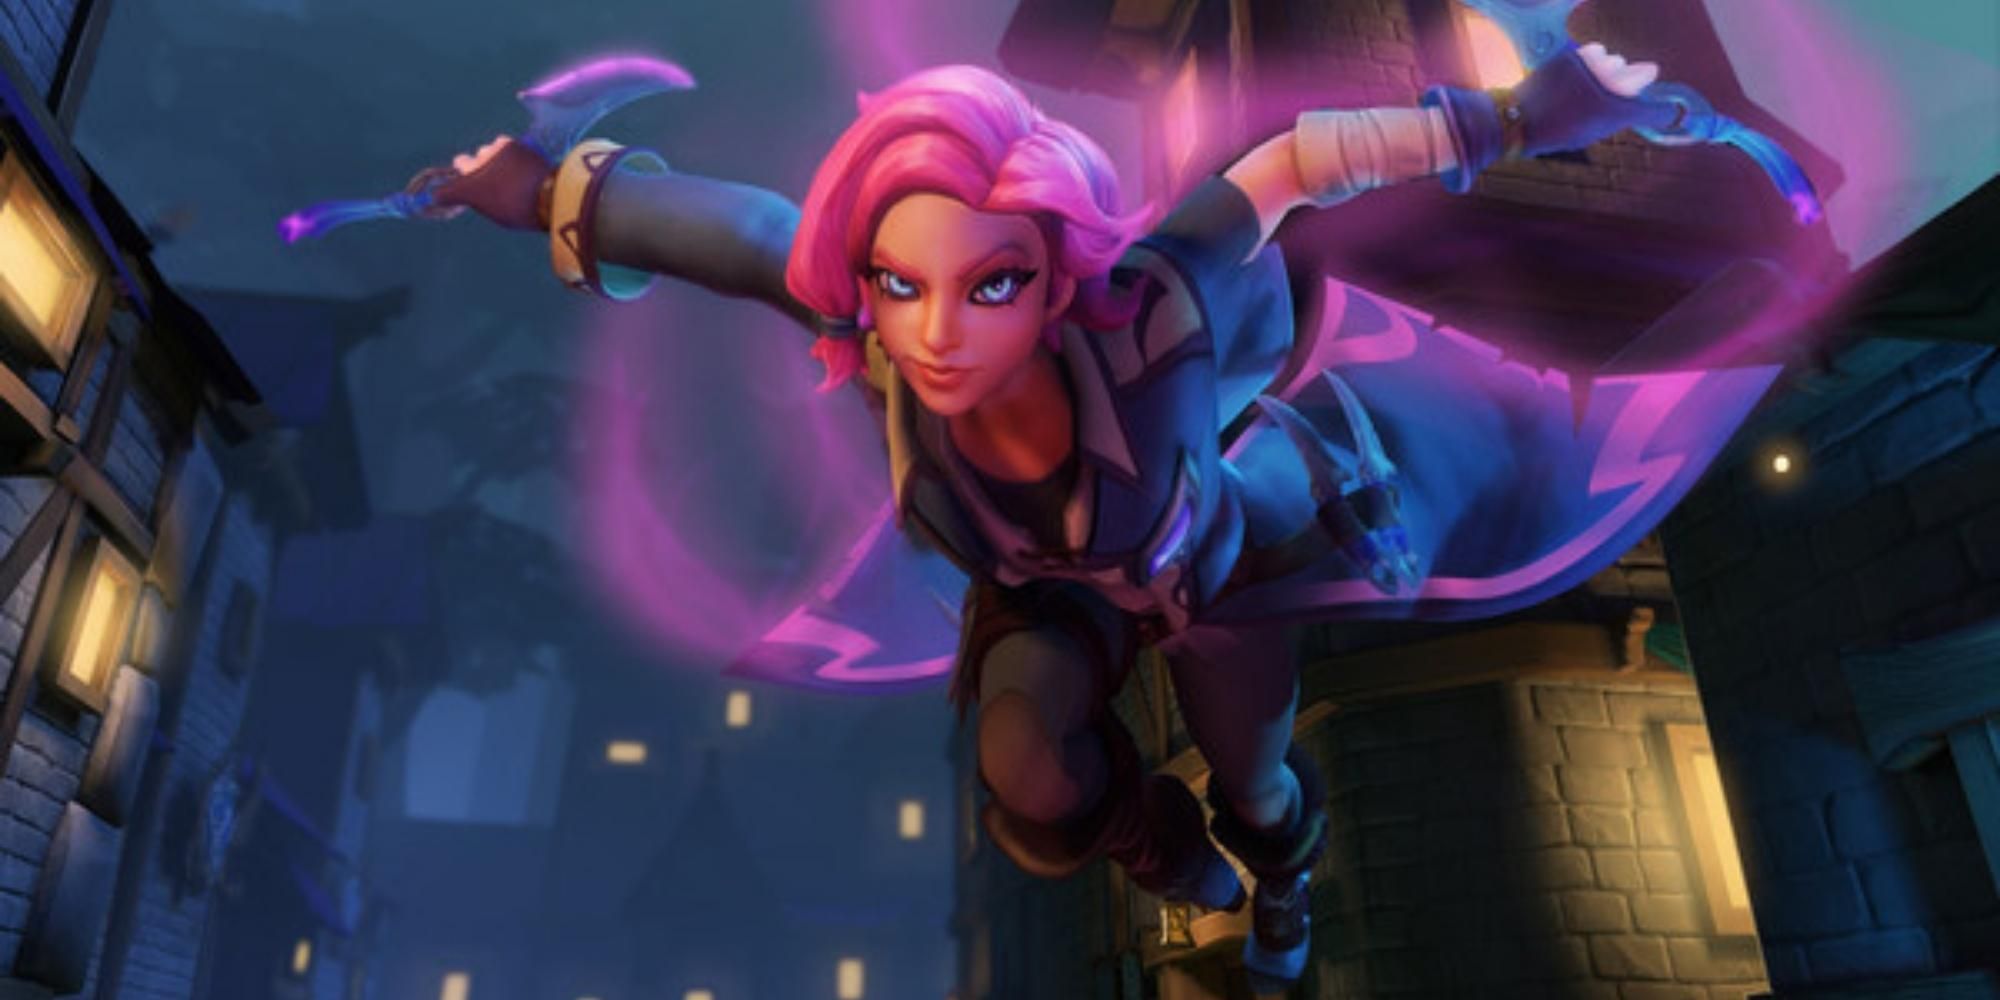 Maeve in Paladins